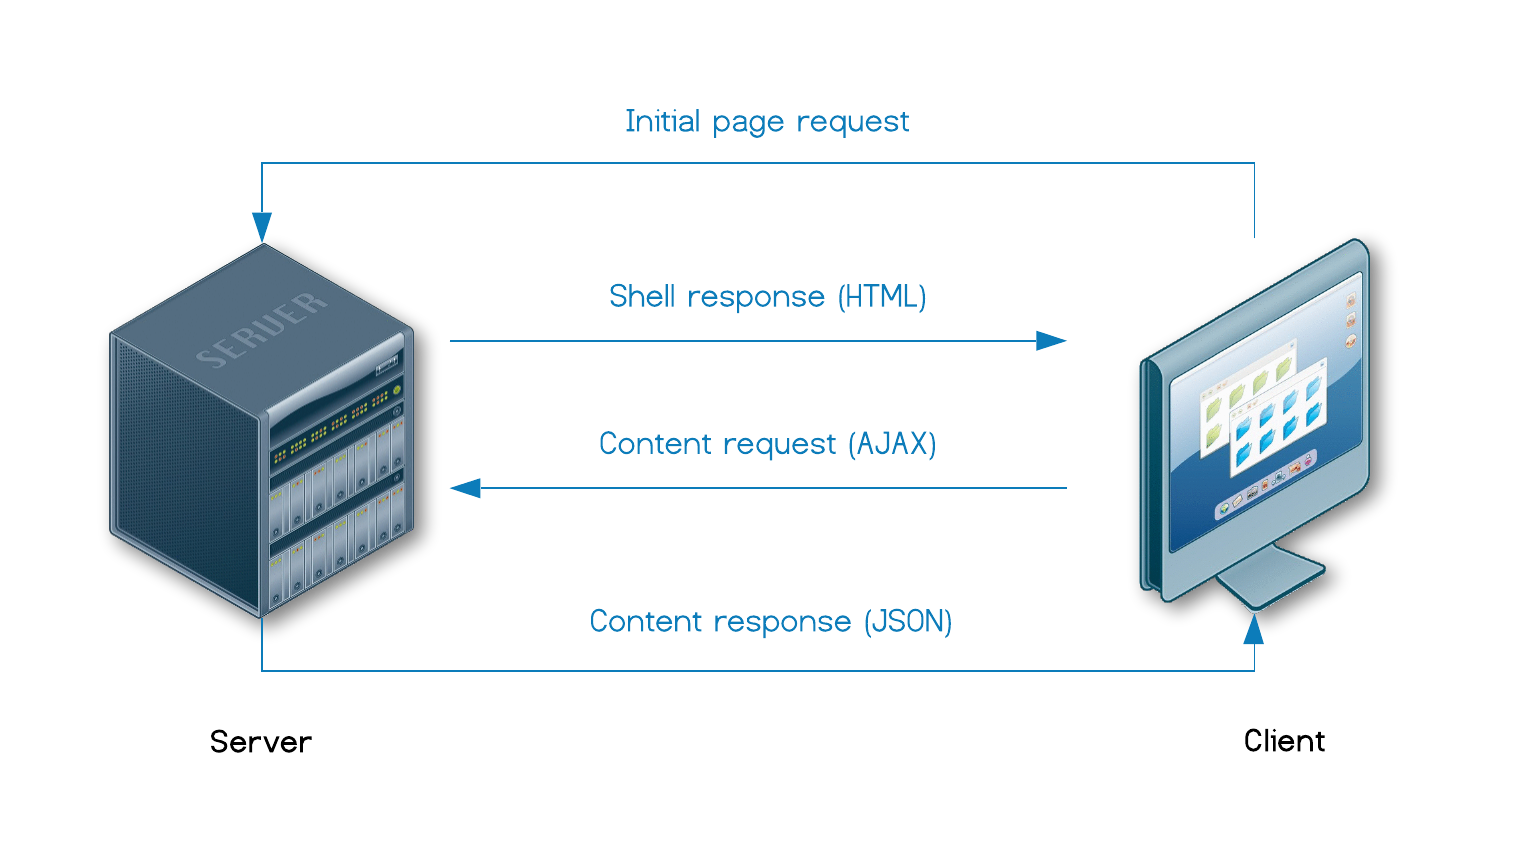 In the name of SEO: server-side rendering for single-page apps | Shakuro